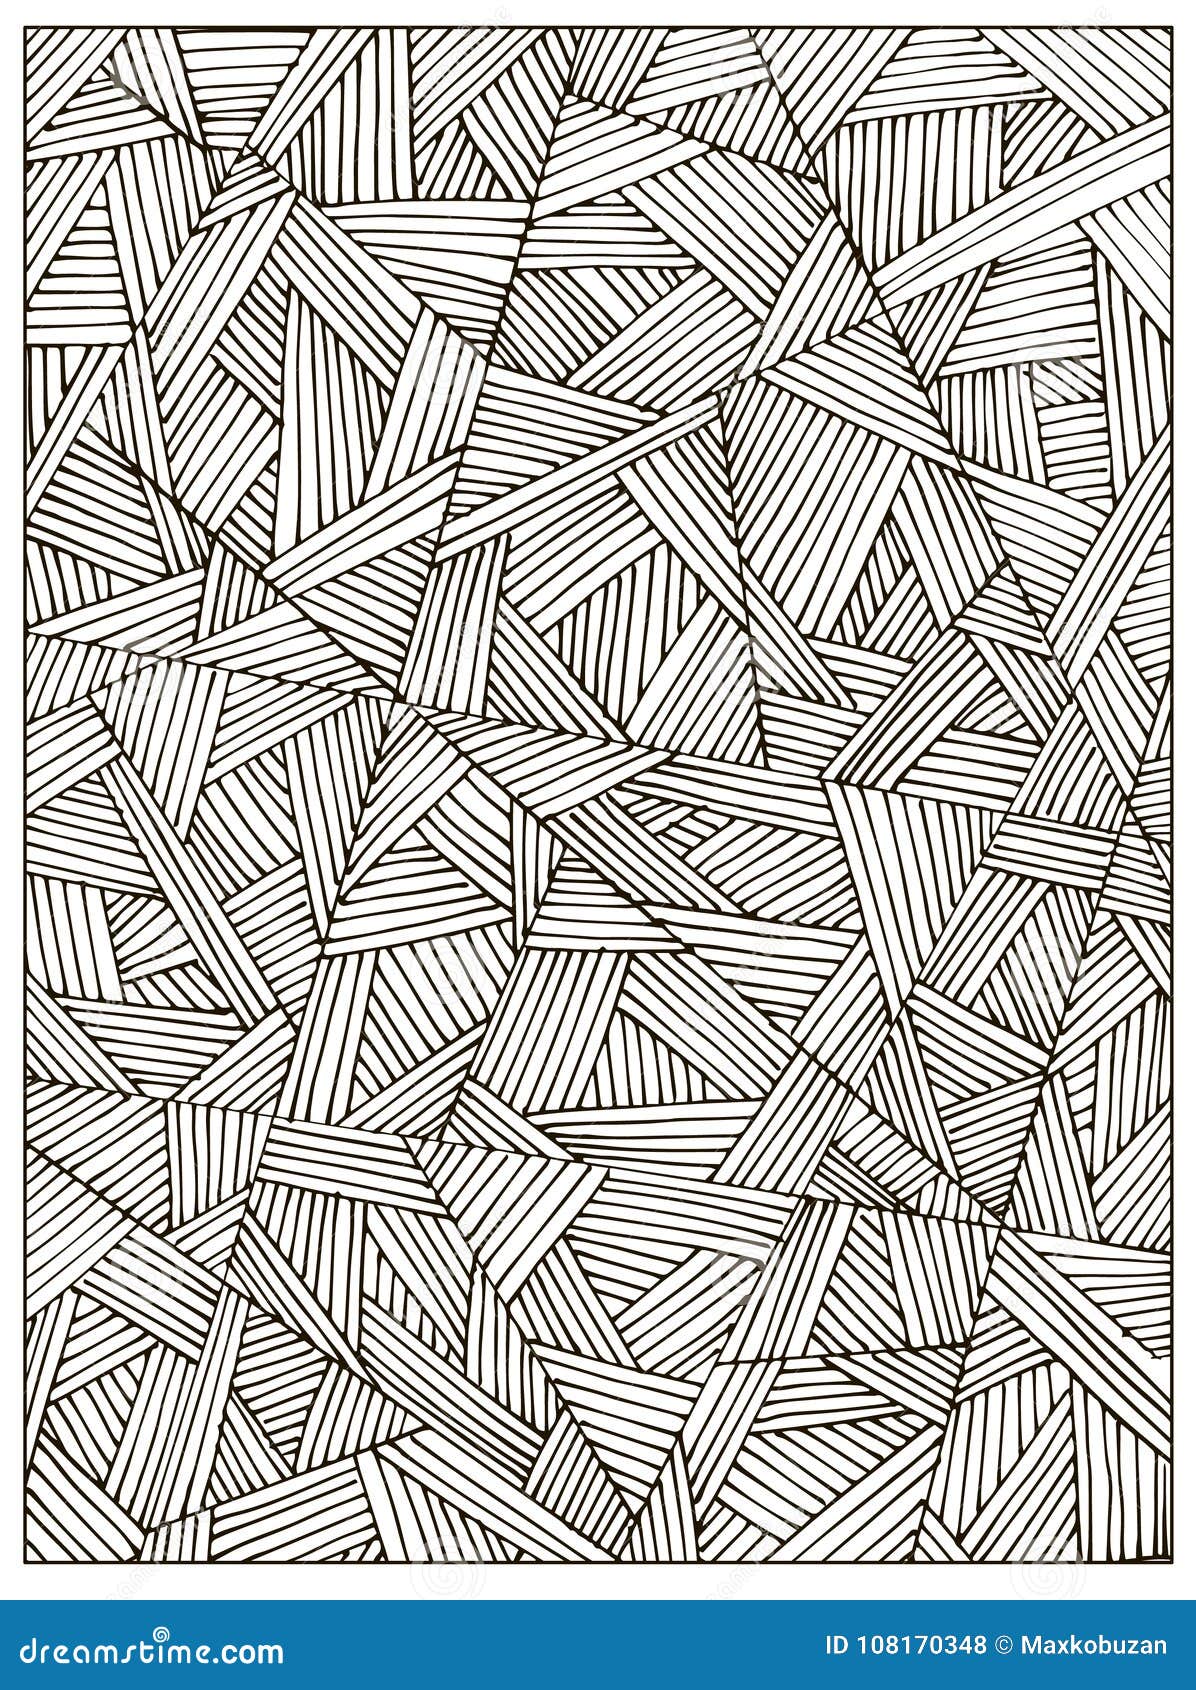 Difficult Uncolored Adult Coloring Book Page for Adults or Kids ...